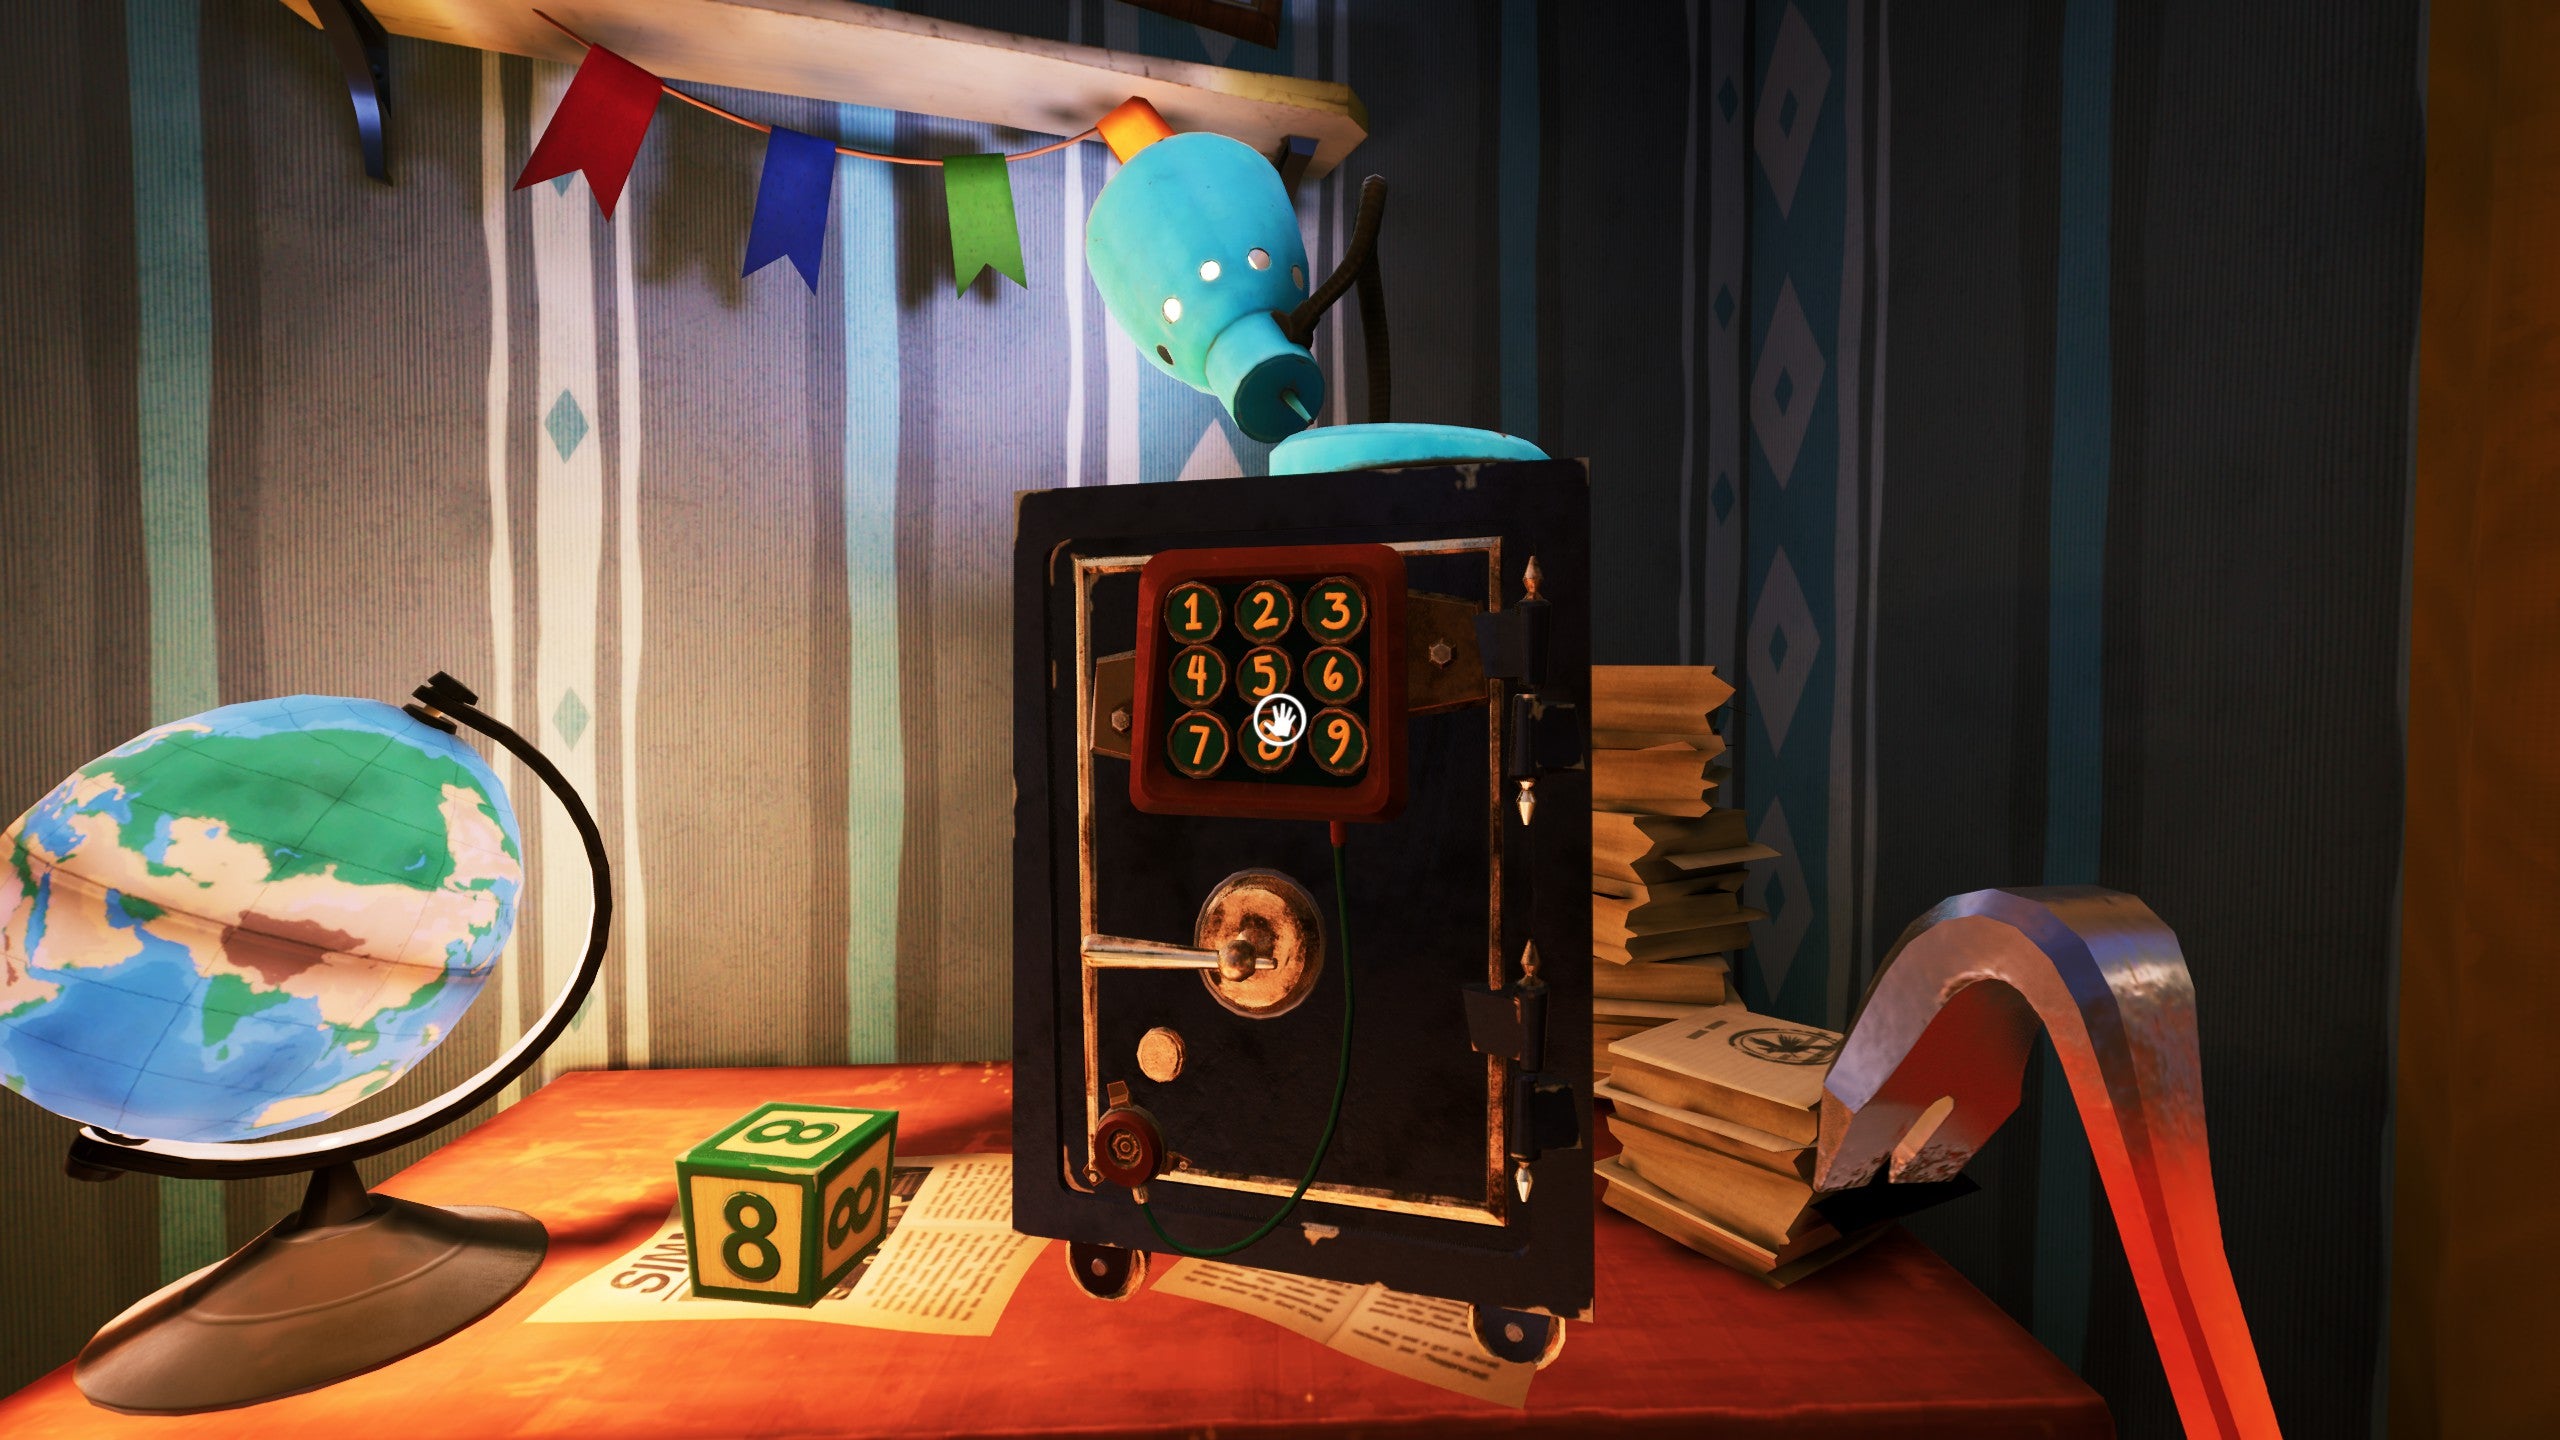 The safe downstairs in the house in Hello Neighbor 2